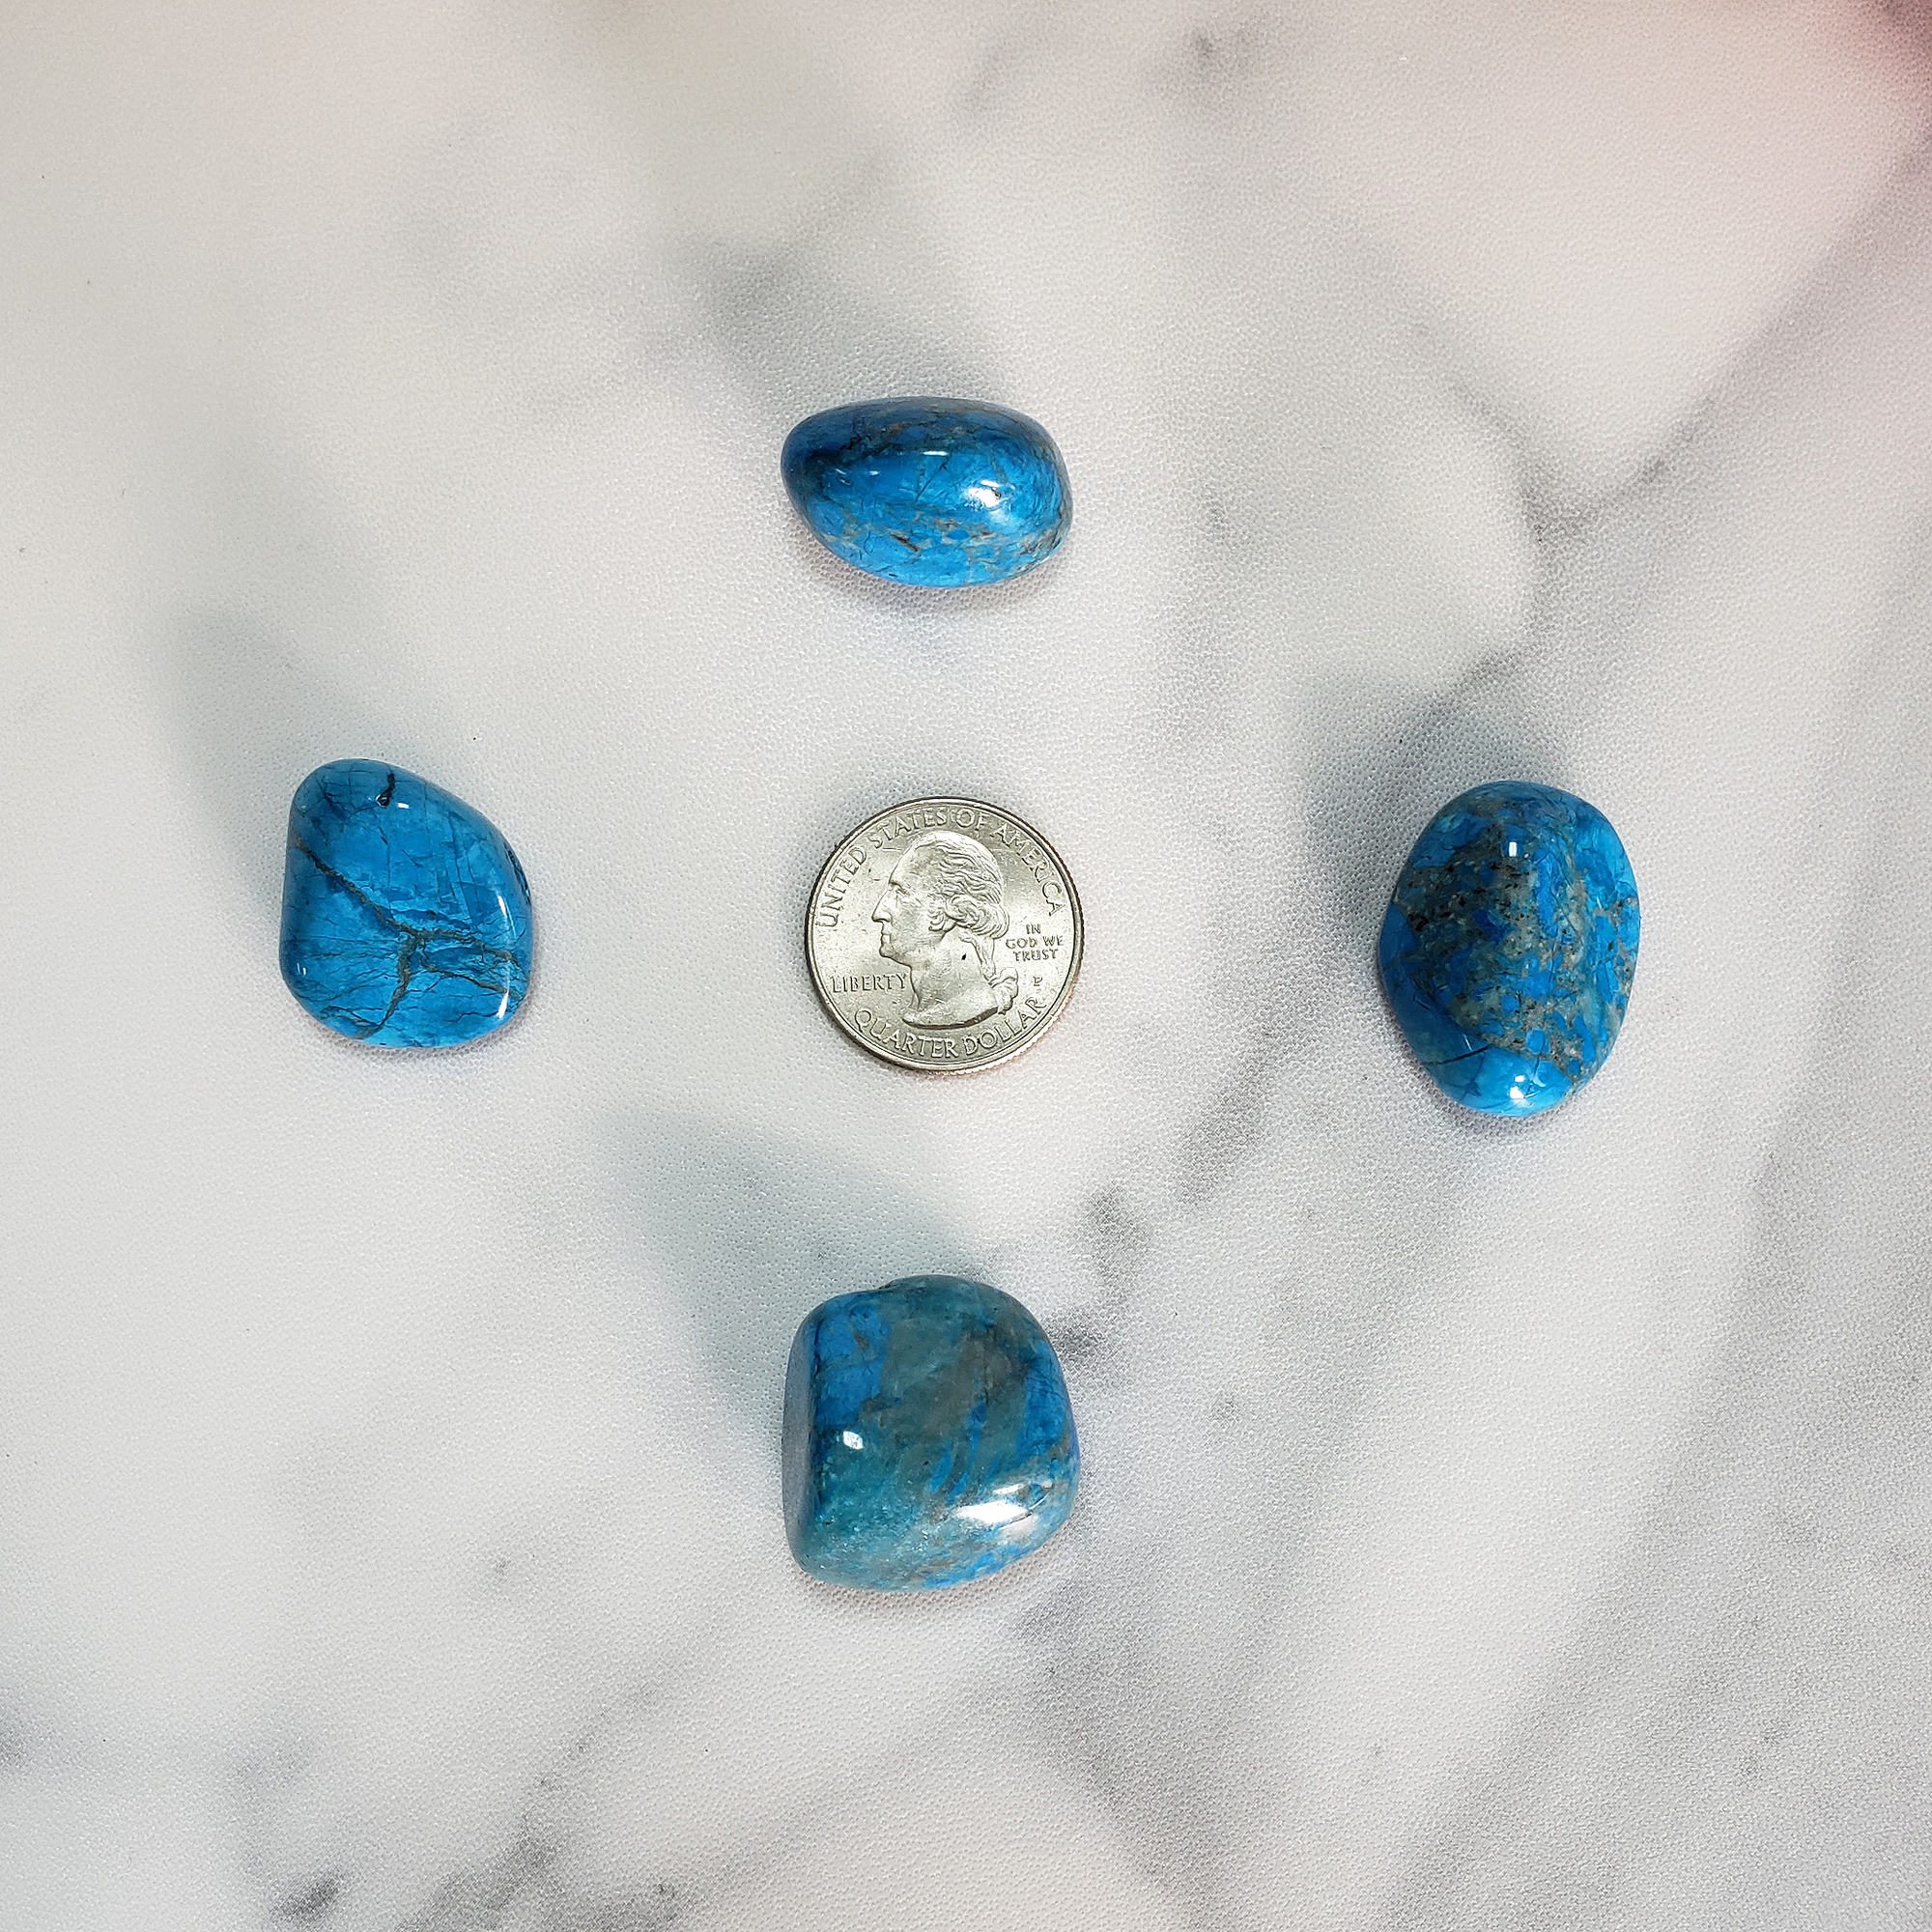 Turquenite Blue Howlite Dyed Tumbled Stone - One Stone - Size Comparison